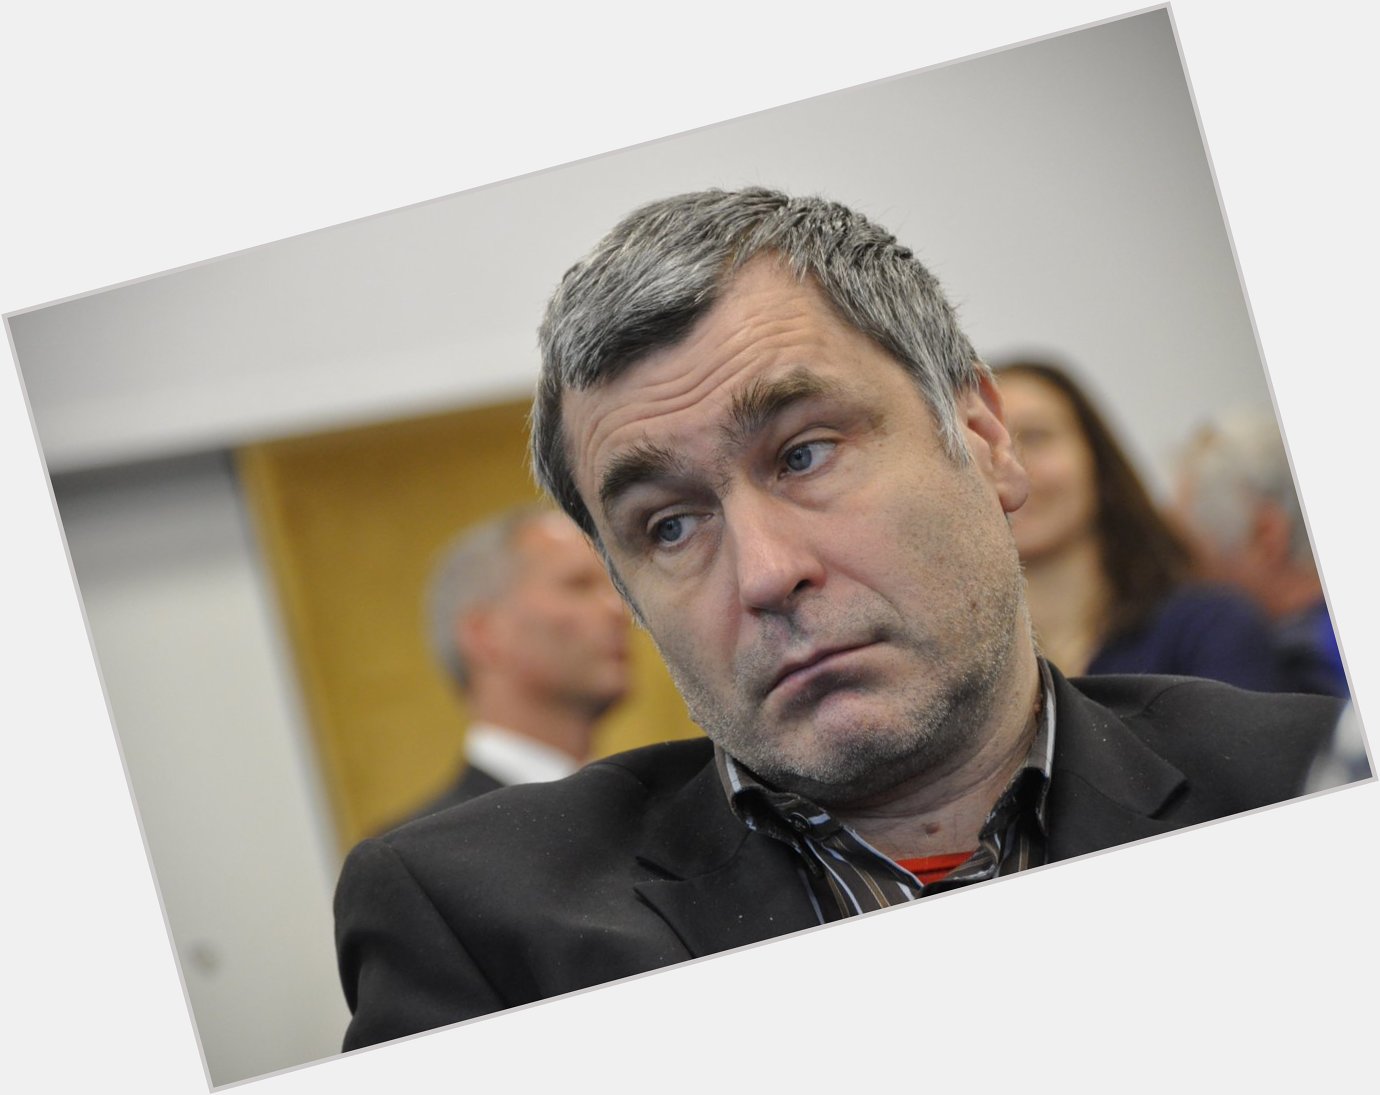 Happy 50th birthday to one of my all-time favorite players, Vassily Ivanchuk. 